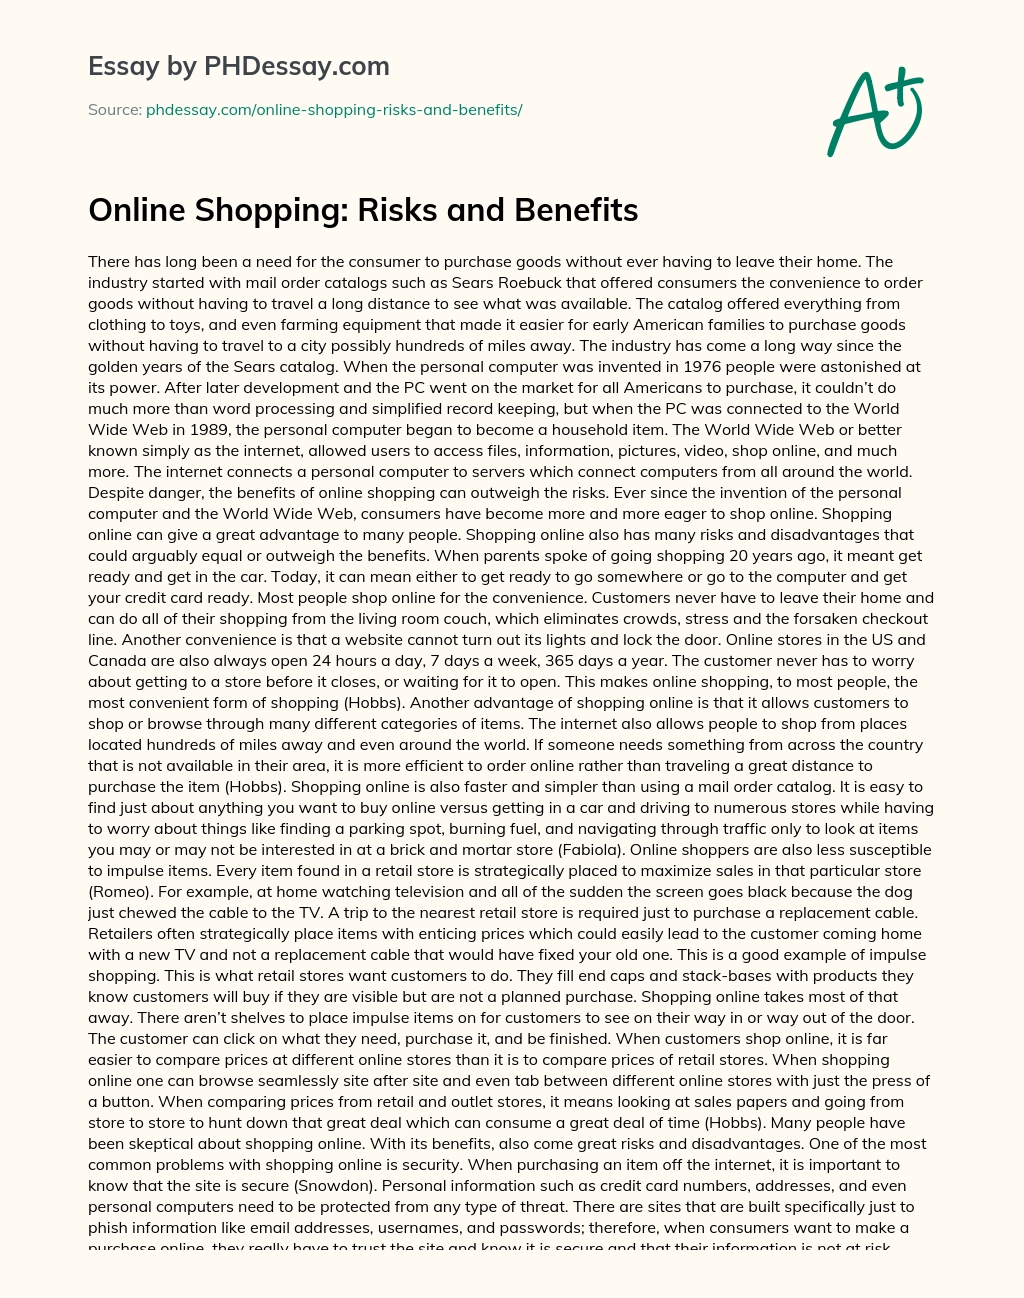 Online Shopping: Risks and Benefits essay